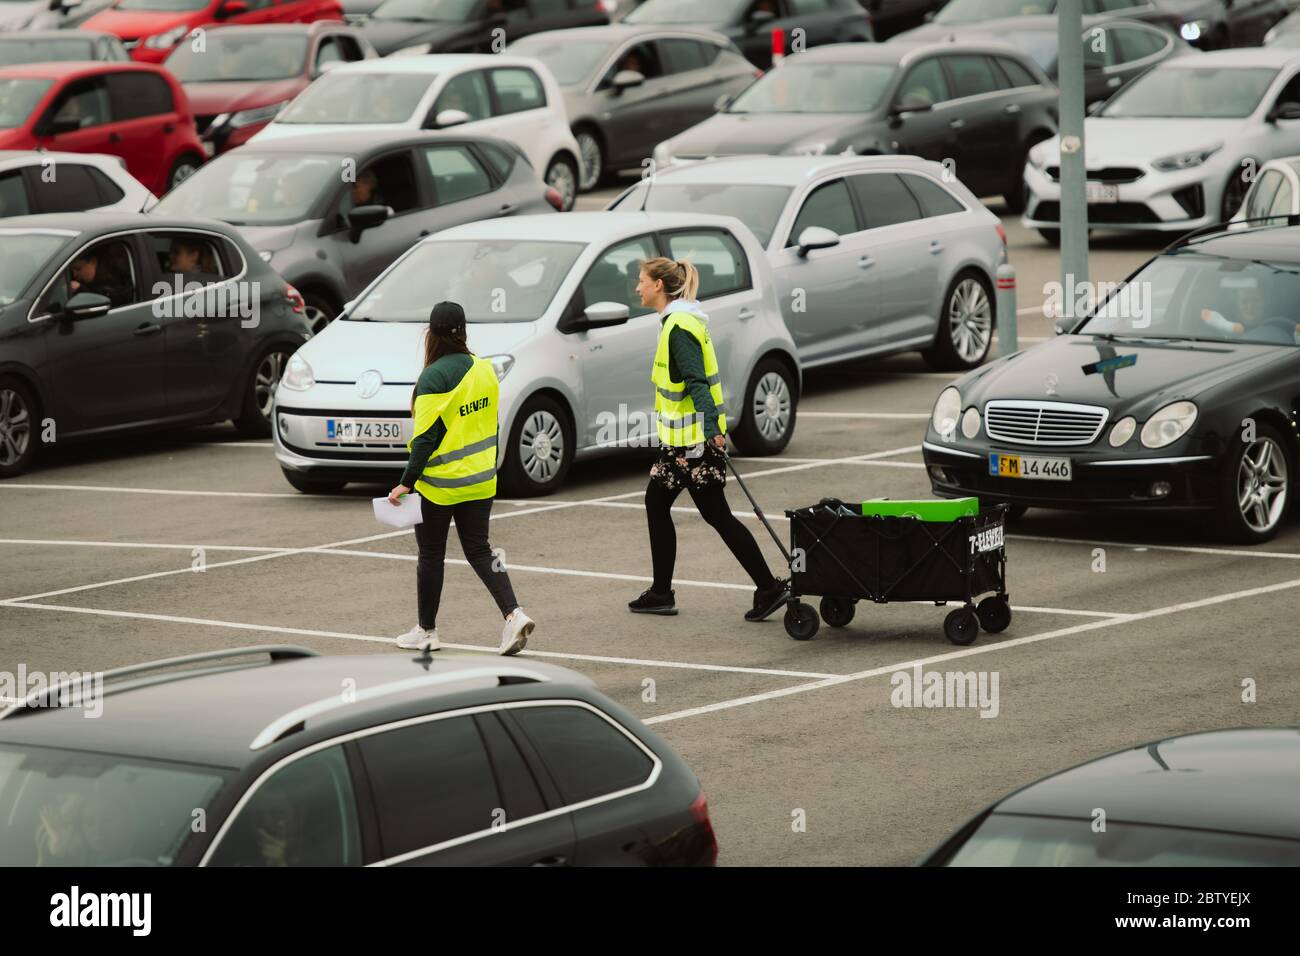 Copenhagen, Denmark. 27th, May 2020. The Danish rapper L.O.C. performs a sold out live drive-in concert at the parking area outside Copenhagen Airport Kastrup. Due to the Corona virus and the lockdown of Denmark, the concert was organized as a drive-in concert where the audience watch the concert from their cars and with the audio streaming out of car radios. (Photo credit: Gonzales Photo - Nikolaj Bransholm). Stock Photo